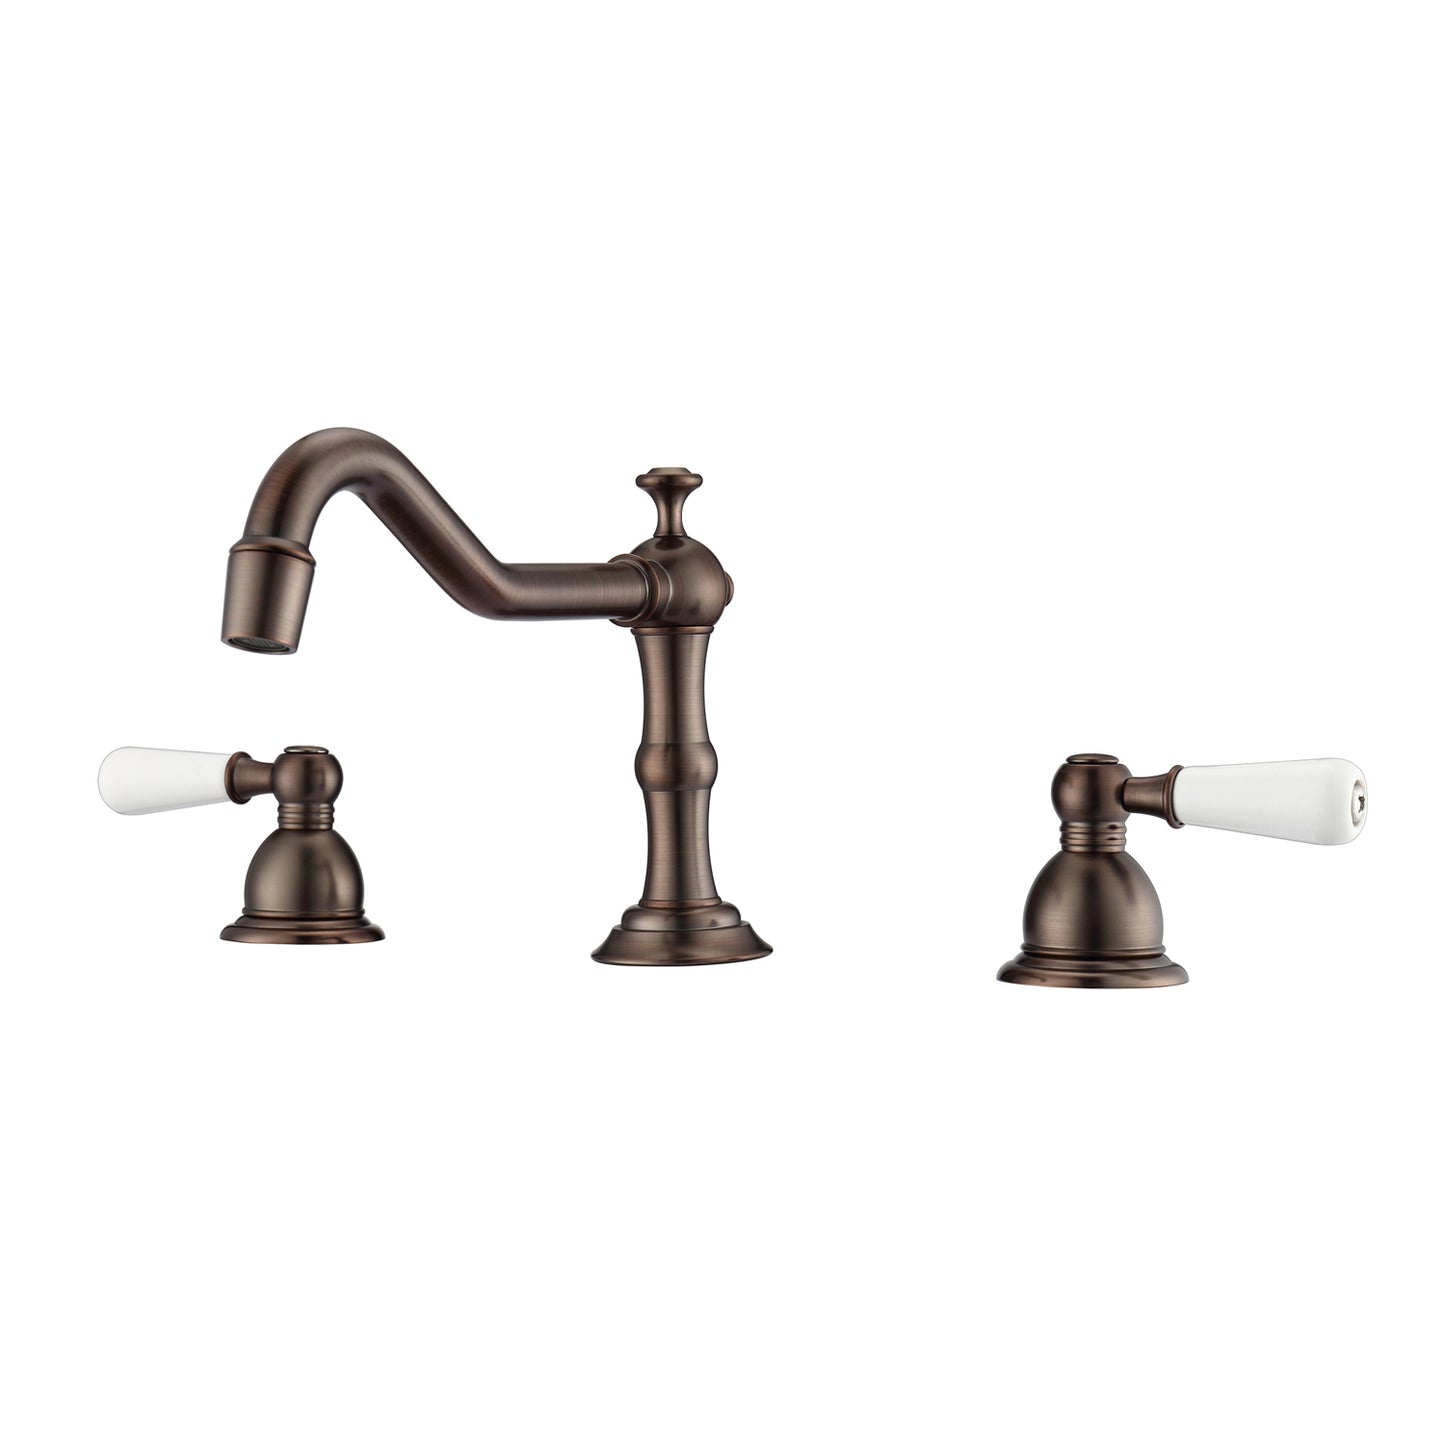 Roma 8" Widespread Oil Rubbed Bronze Bathroom Faucet with Porcelain Lever Handles